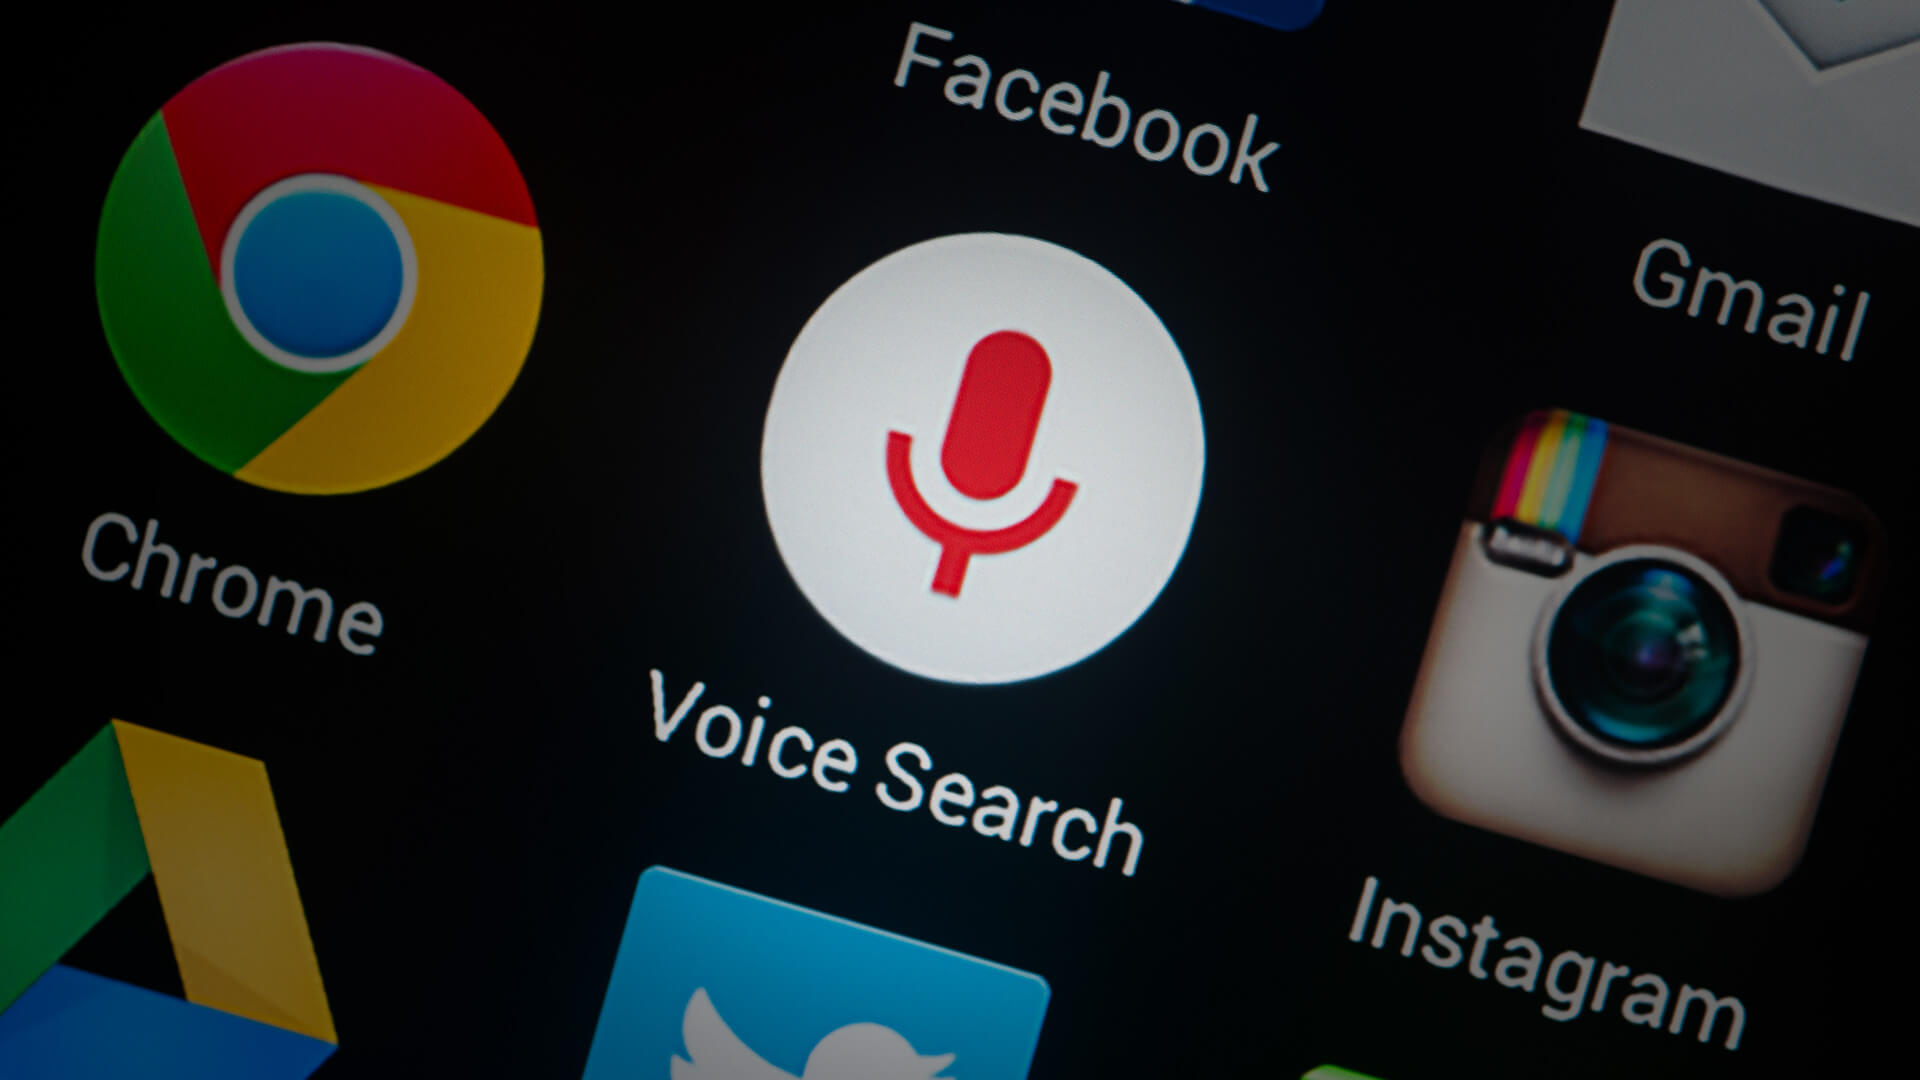 voice-search-app-ss-1920